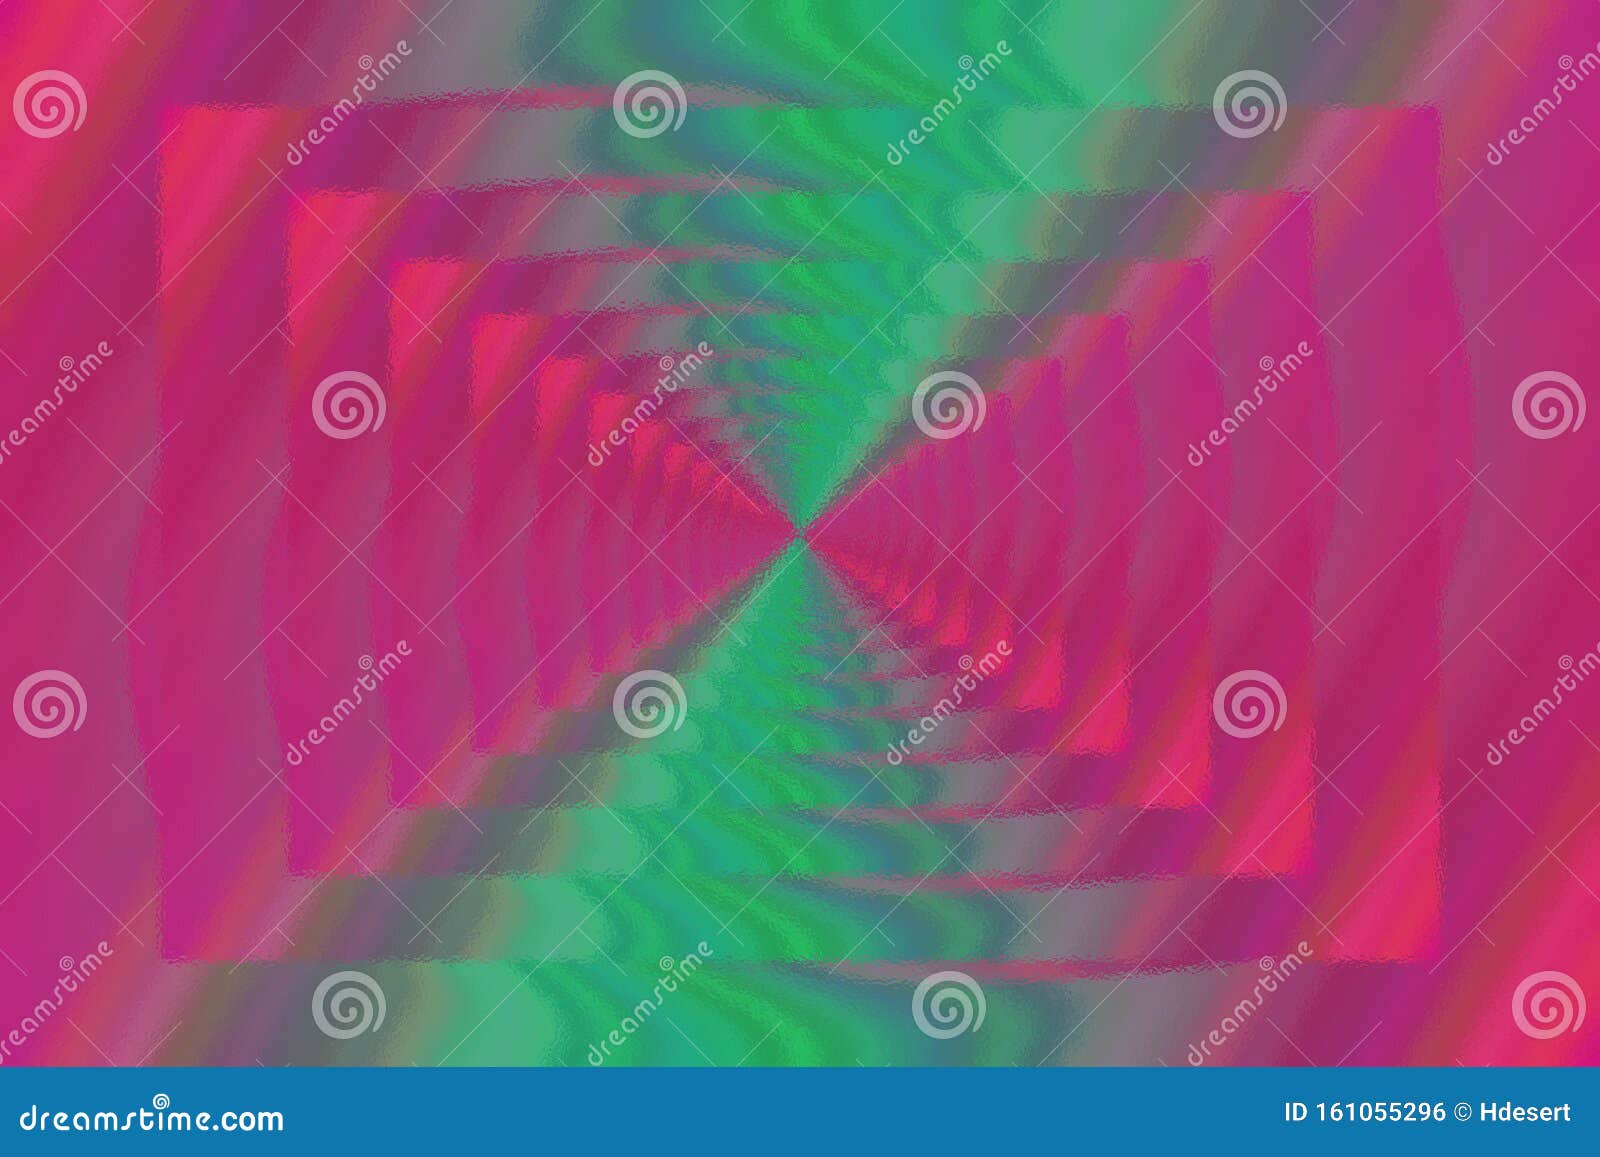 Magenta and Green Abstract Glass Texture Background, Design Pattern ...